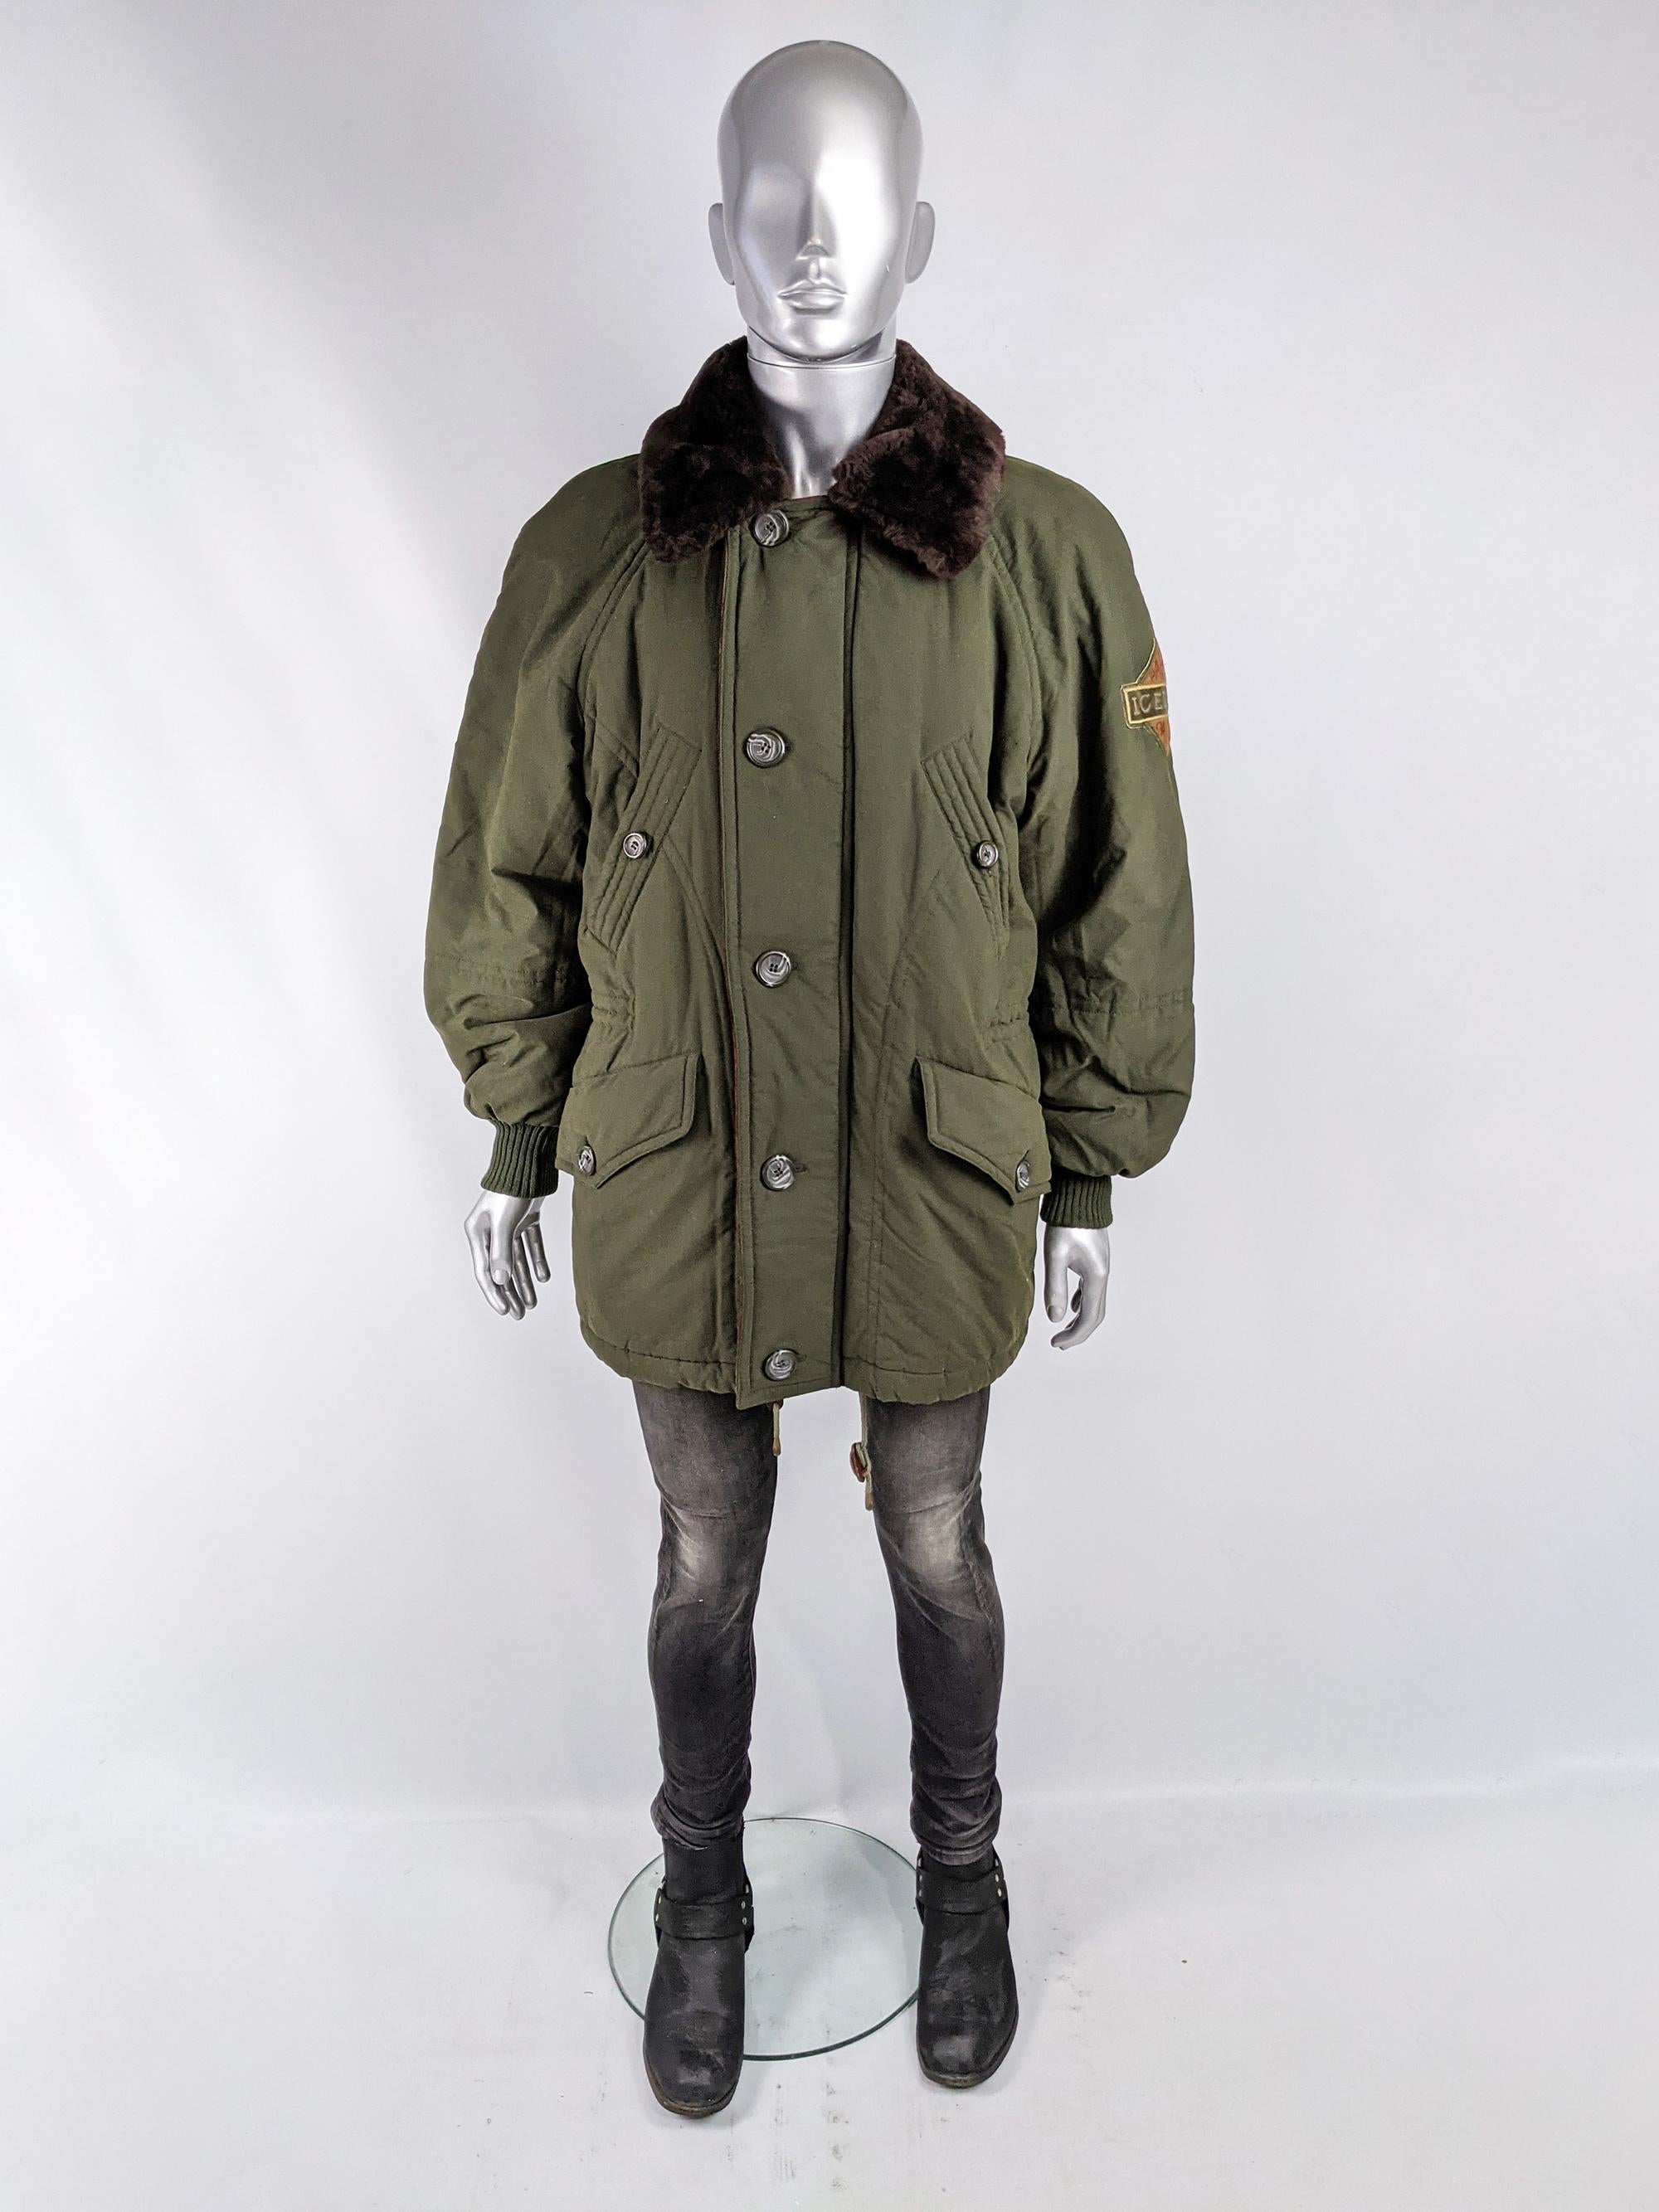 An excellent and rare vintage mens parka from the 90s by luxury Italian fashion house, Iceberg. In a military green, quilted fabric with raglan sleeves, inner drawstrings to pull in the waist for a more flattering cut, a faux fur collar, suede trim